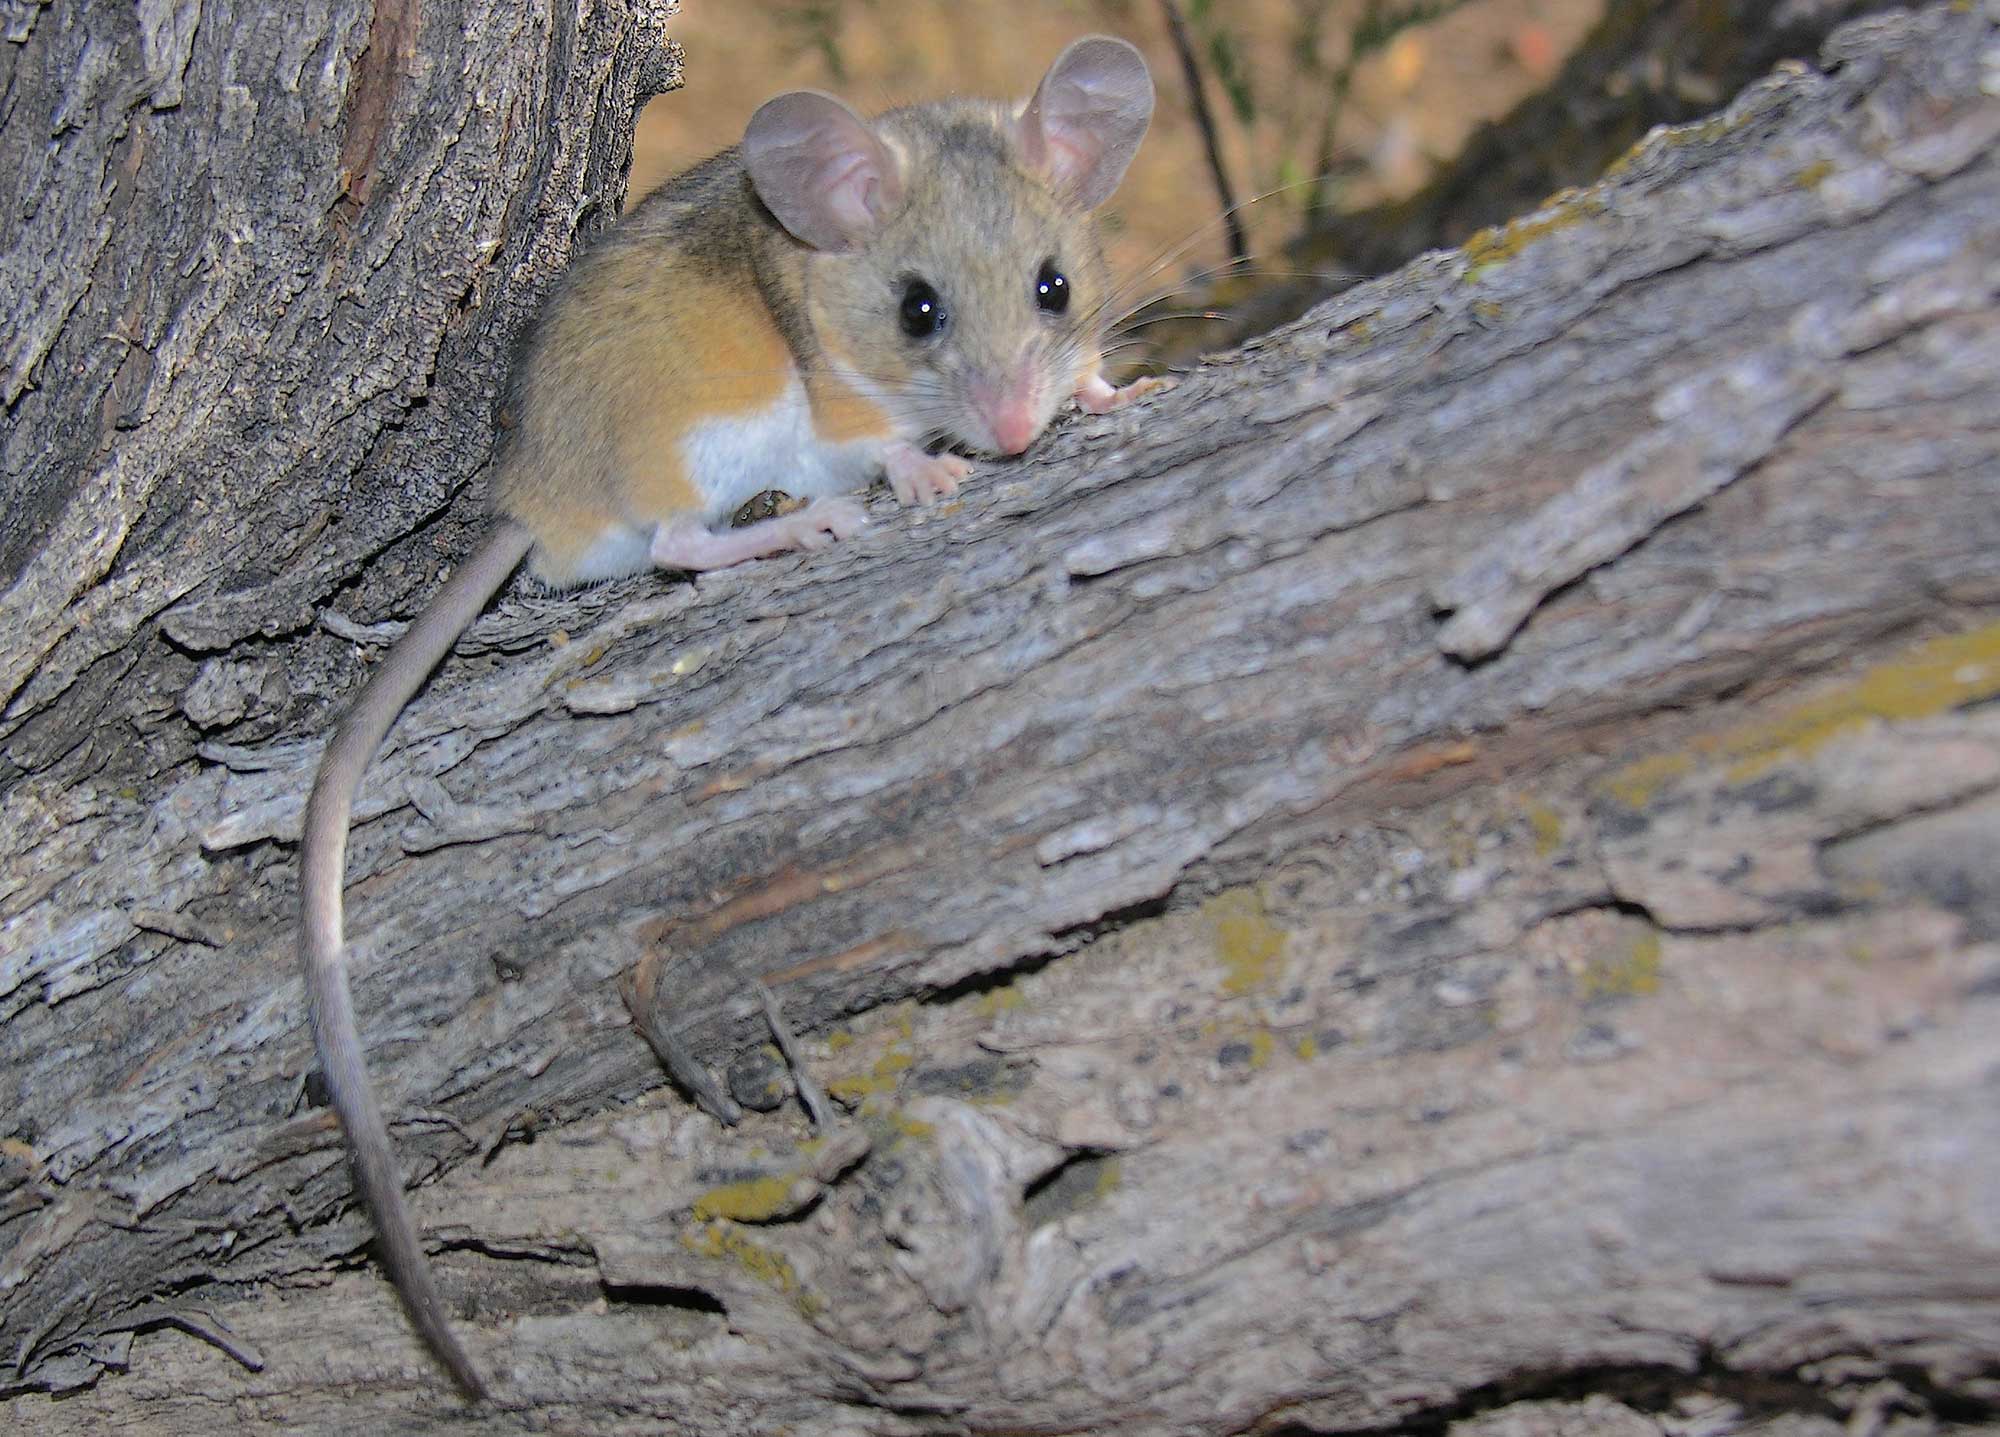 Photograph of a light brown dear mouse with a white belly sitting on a log.